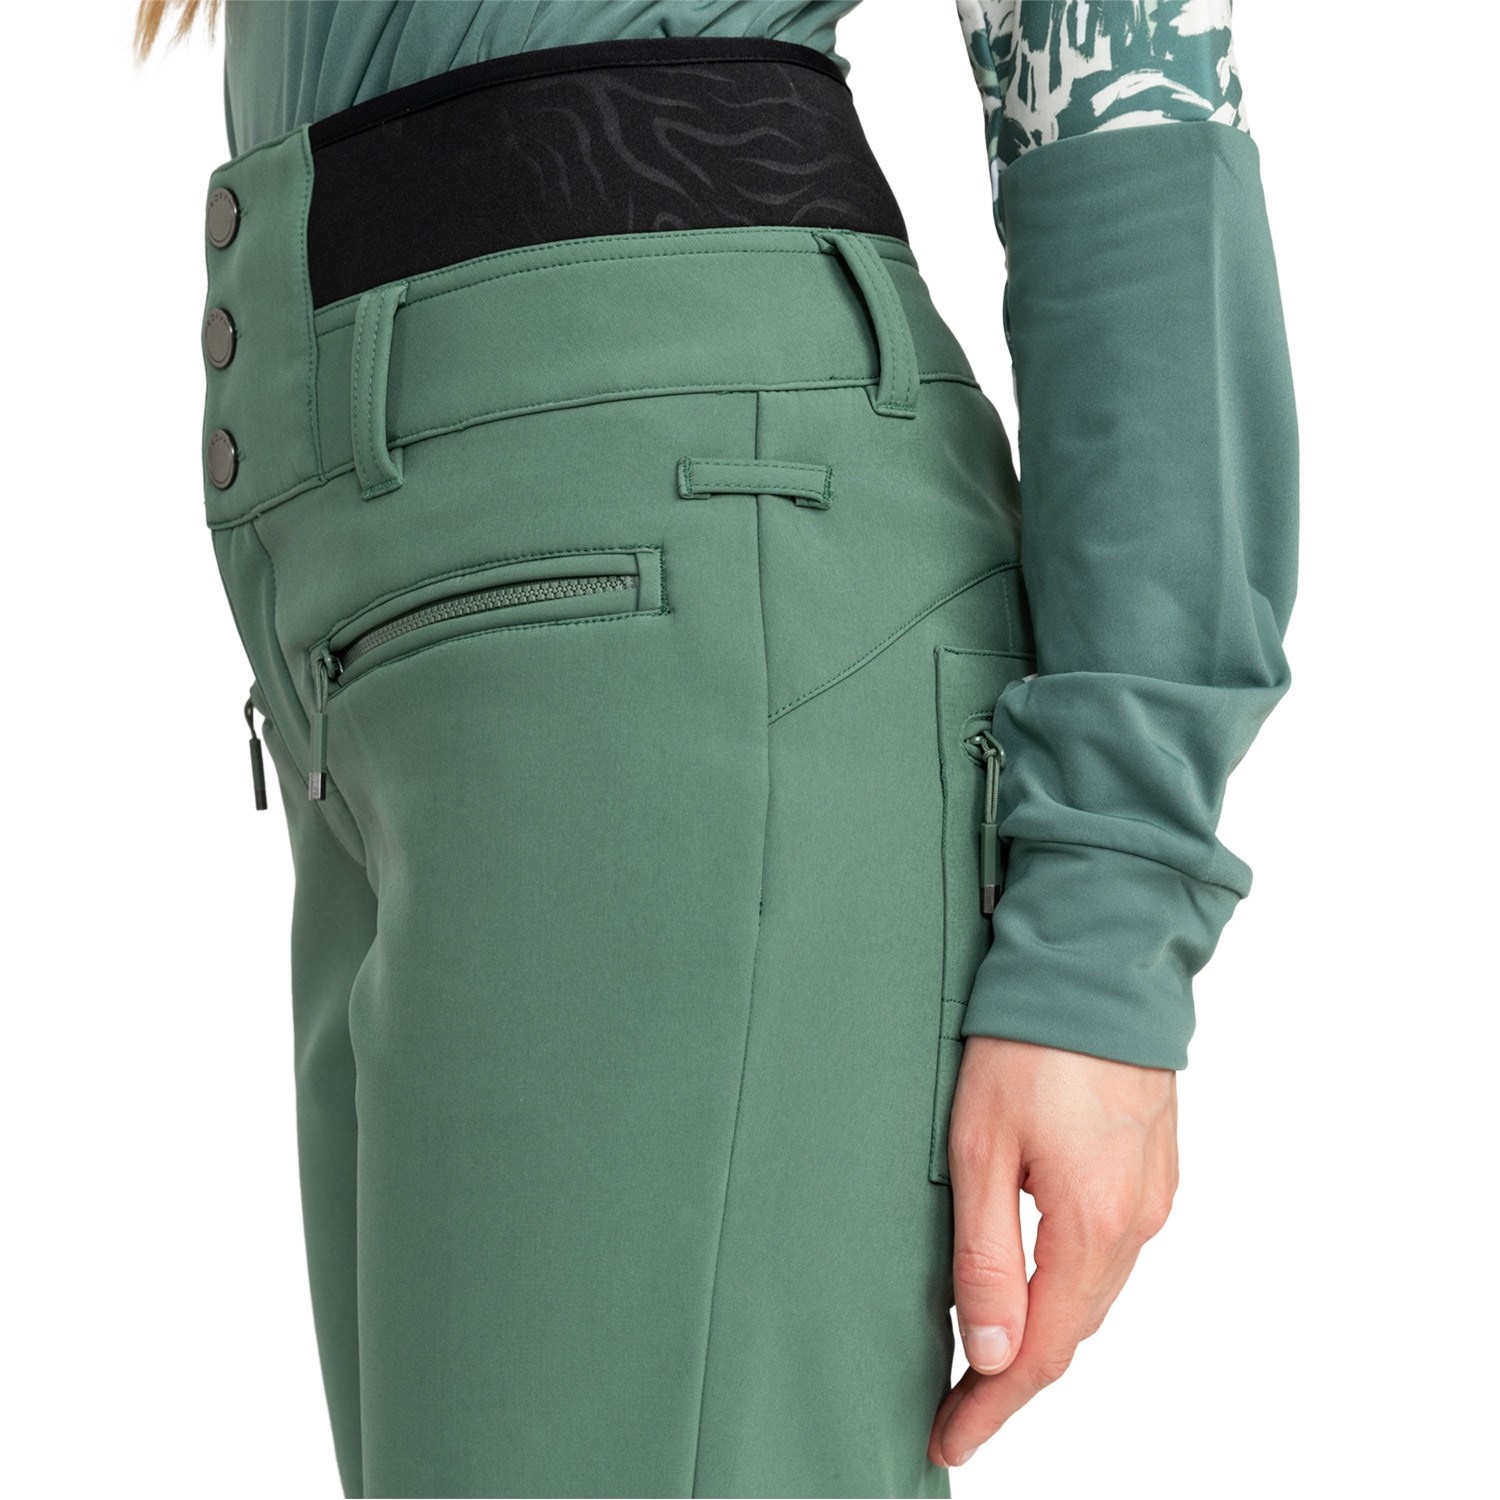  Roxy Women's Rising High Snow Pants with DryFlight Technology,  Bluing, X-Small : Clothing, Shoes & Jewelry